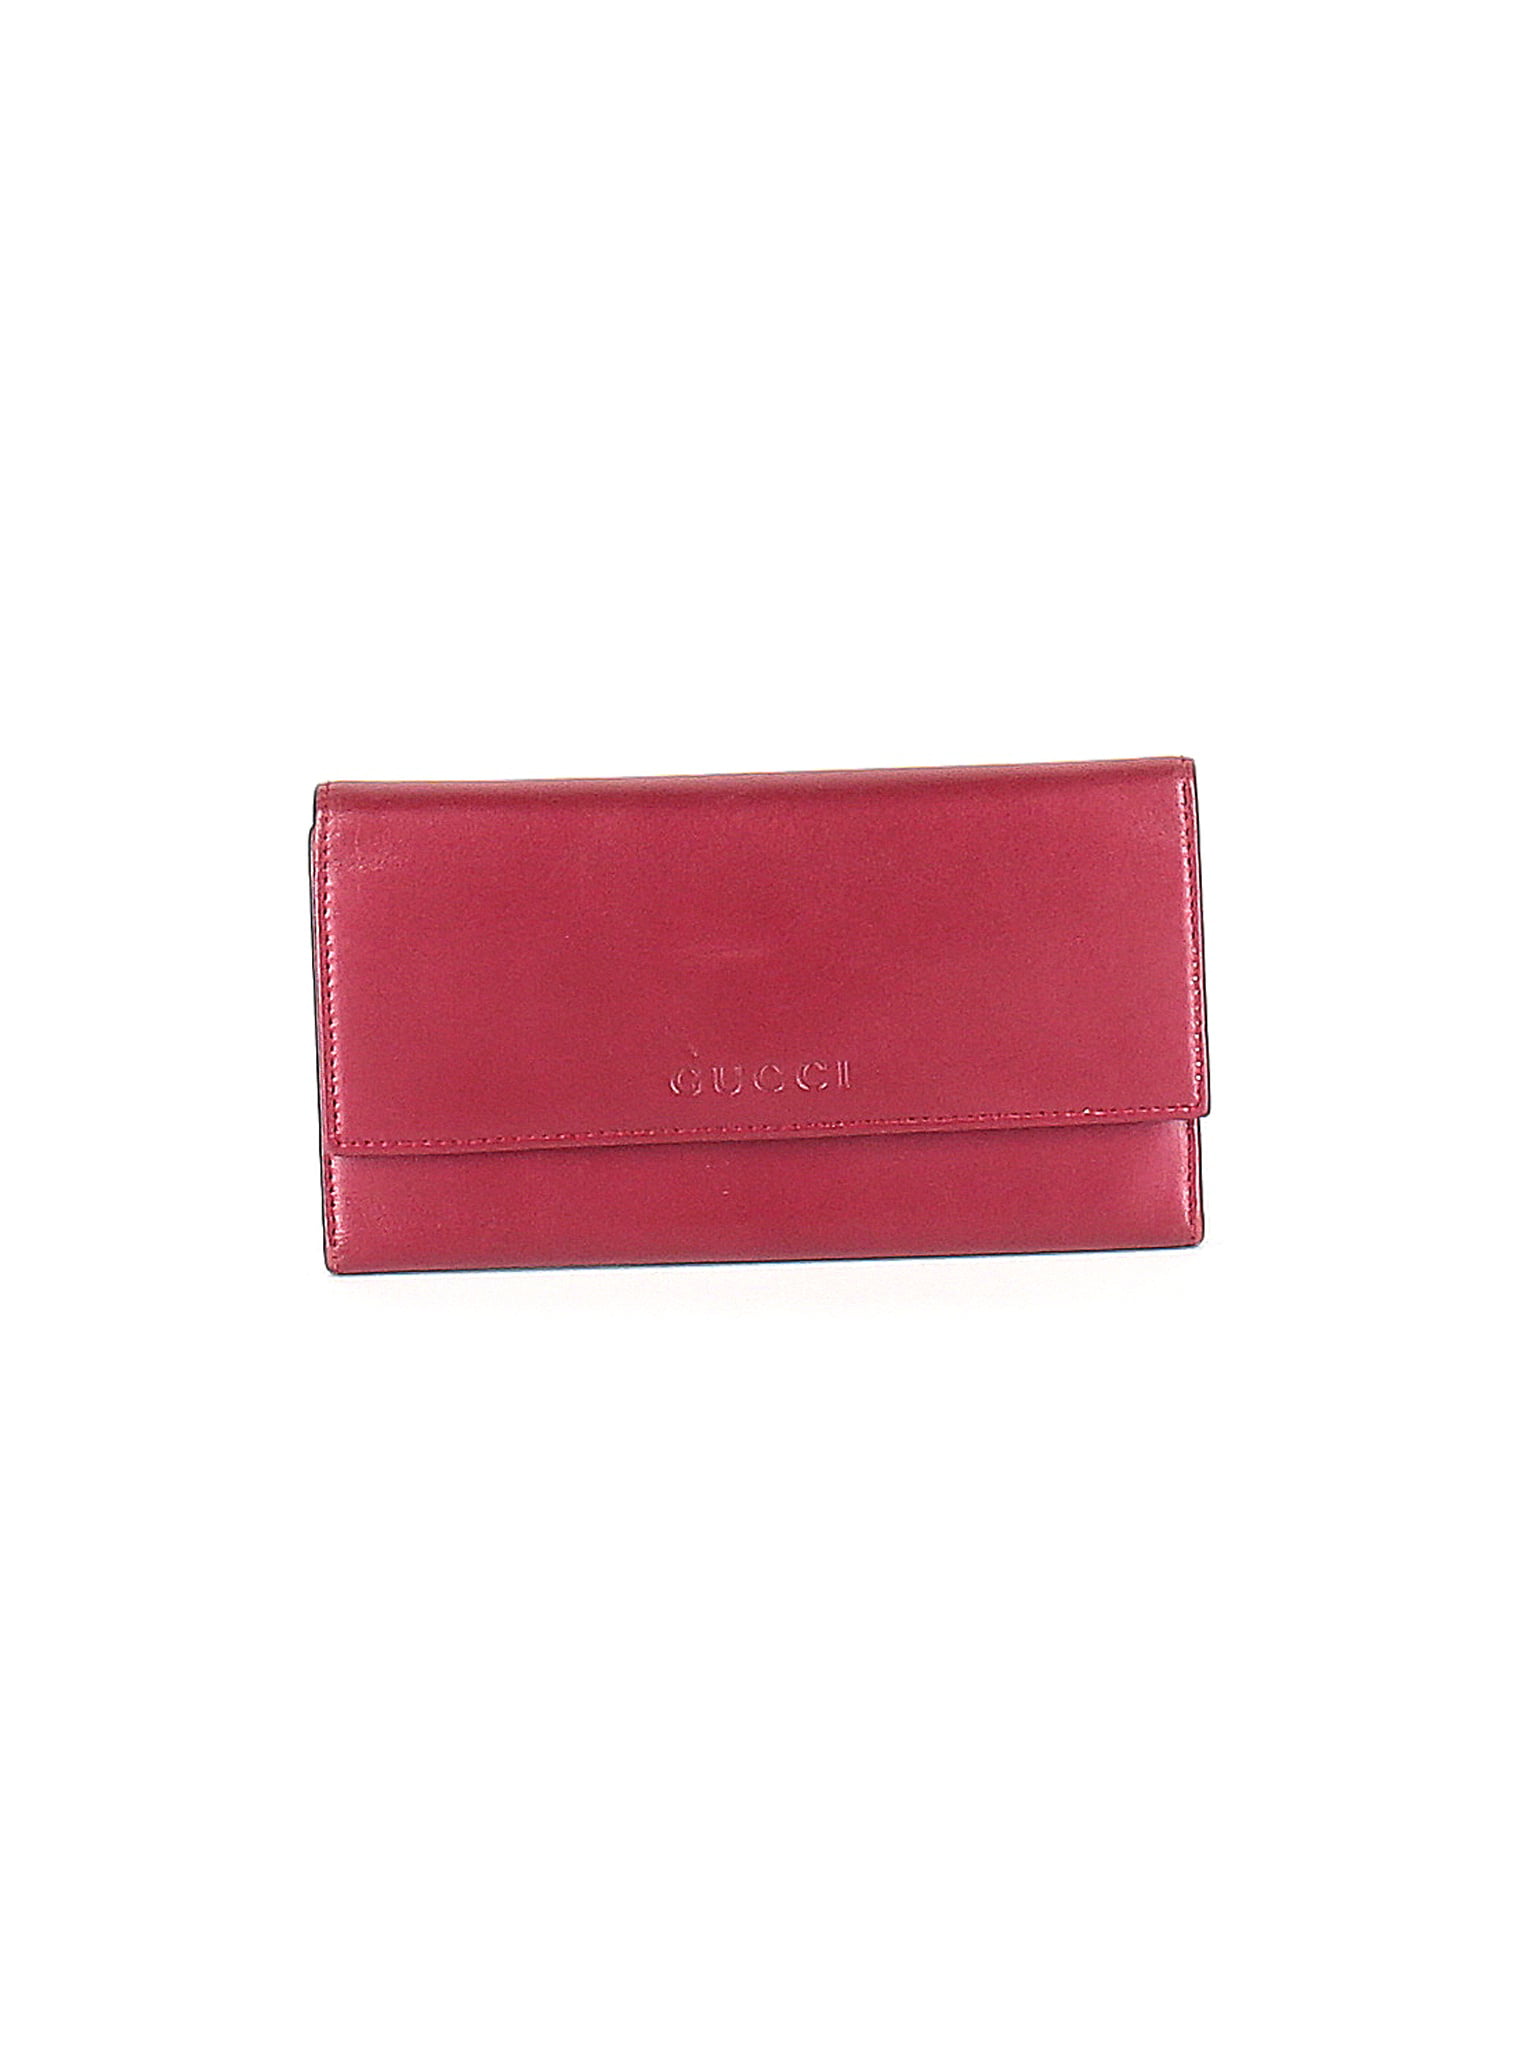 Gucci Outlet - Pre-Owned Gucci Outlet Women&#39;s One Size Fits All Leather Wallet - 0 ...